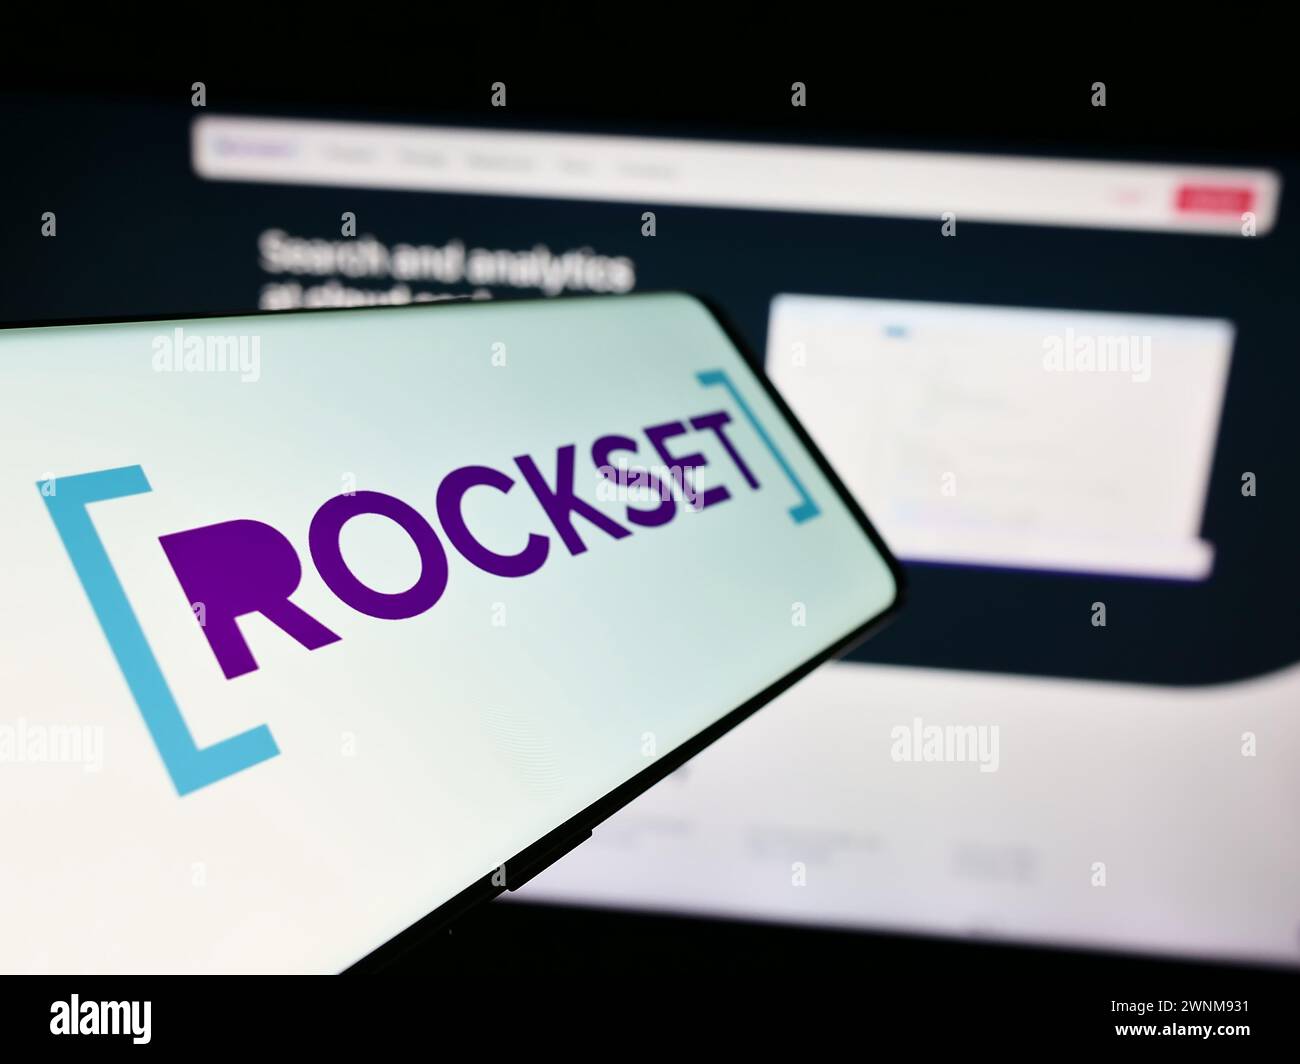 Smartphone with logo of American analytics database company Rockset Inc. in front of business website. Focus on left of phone display. Stock Photo